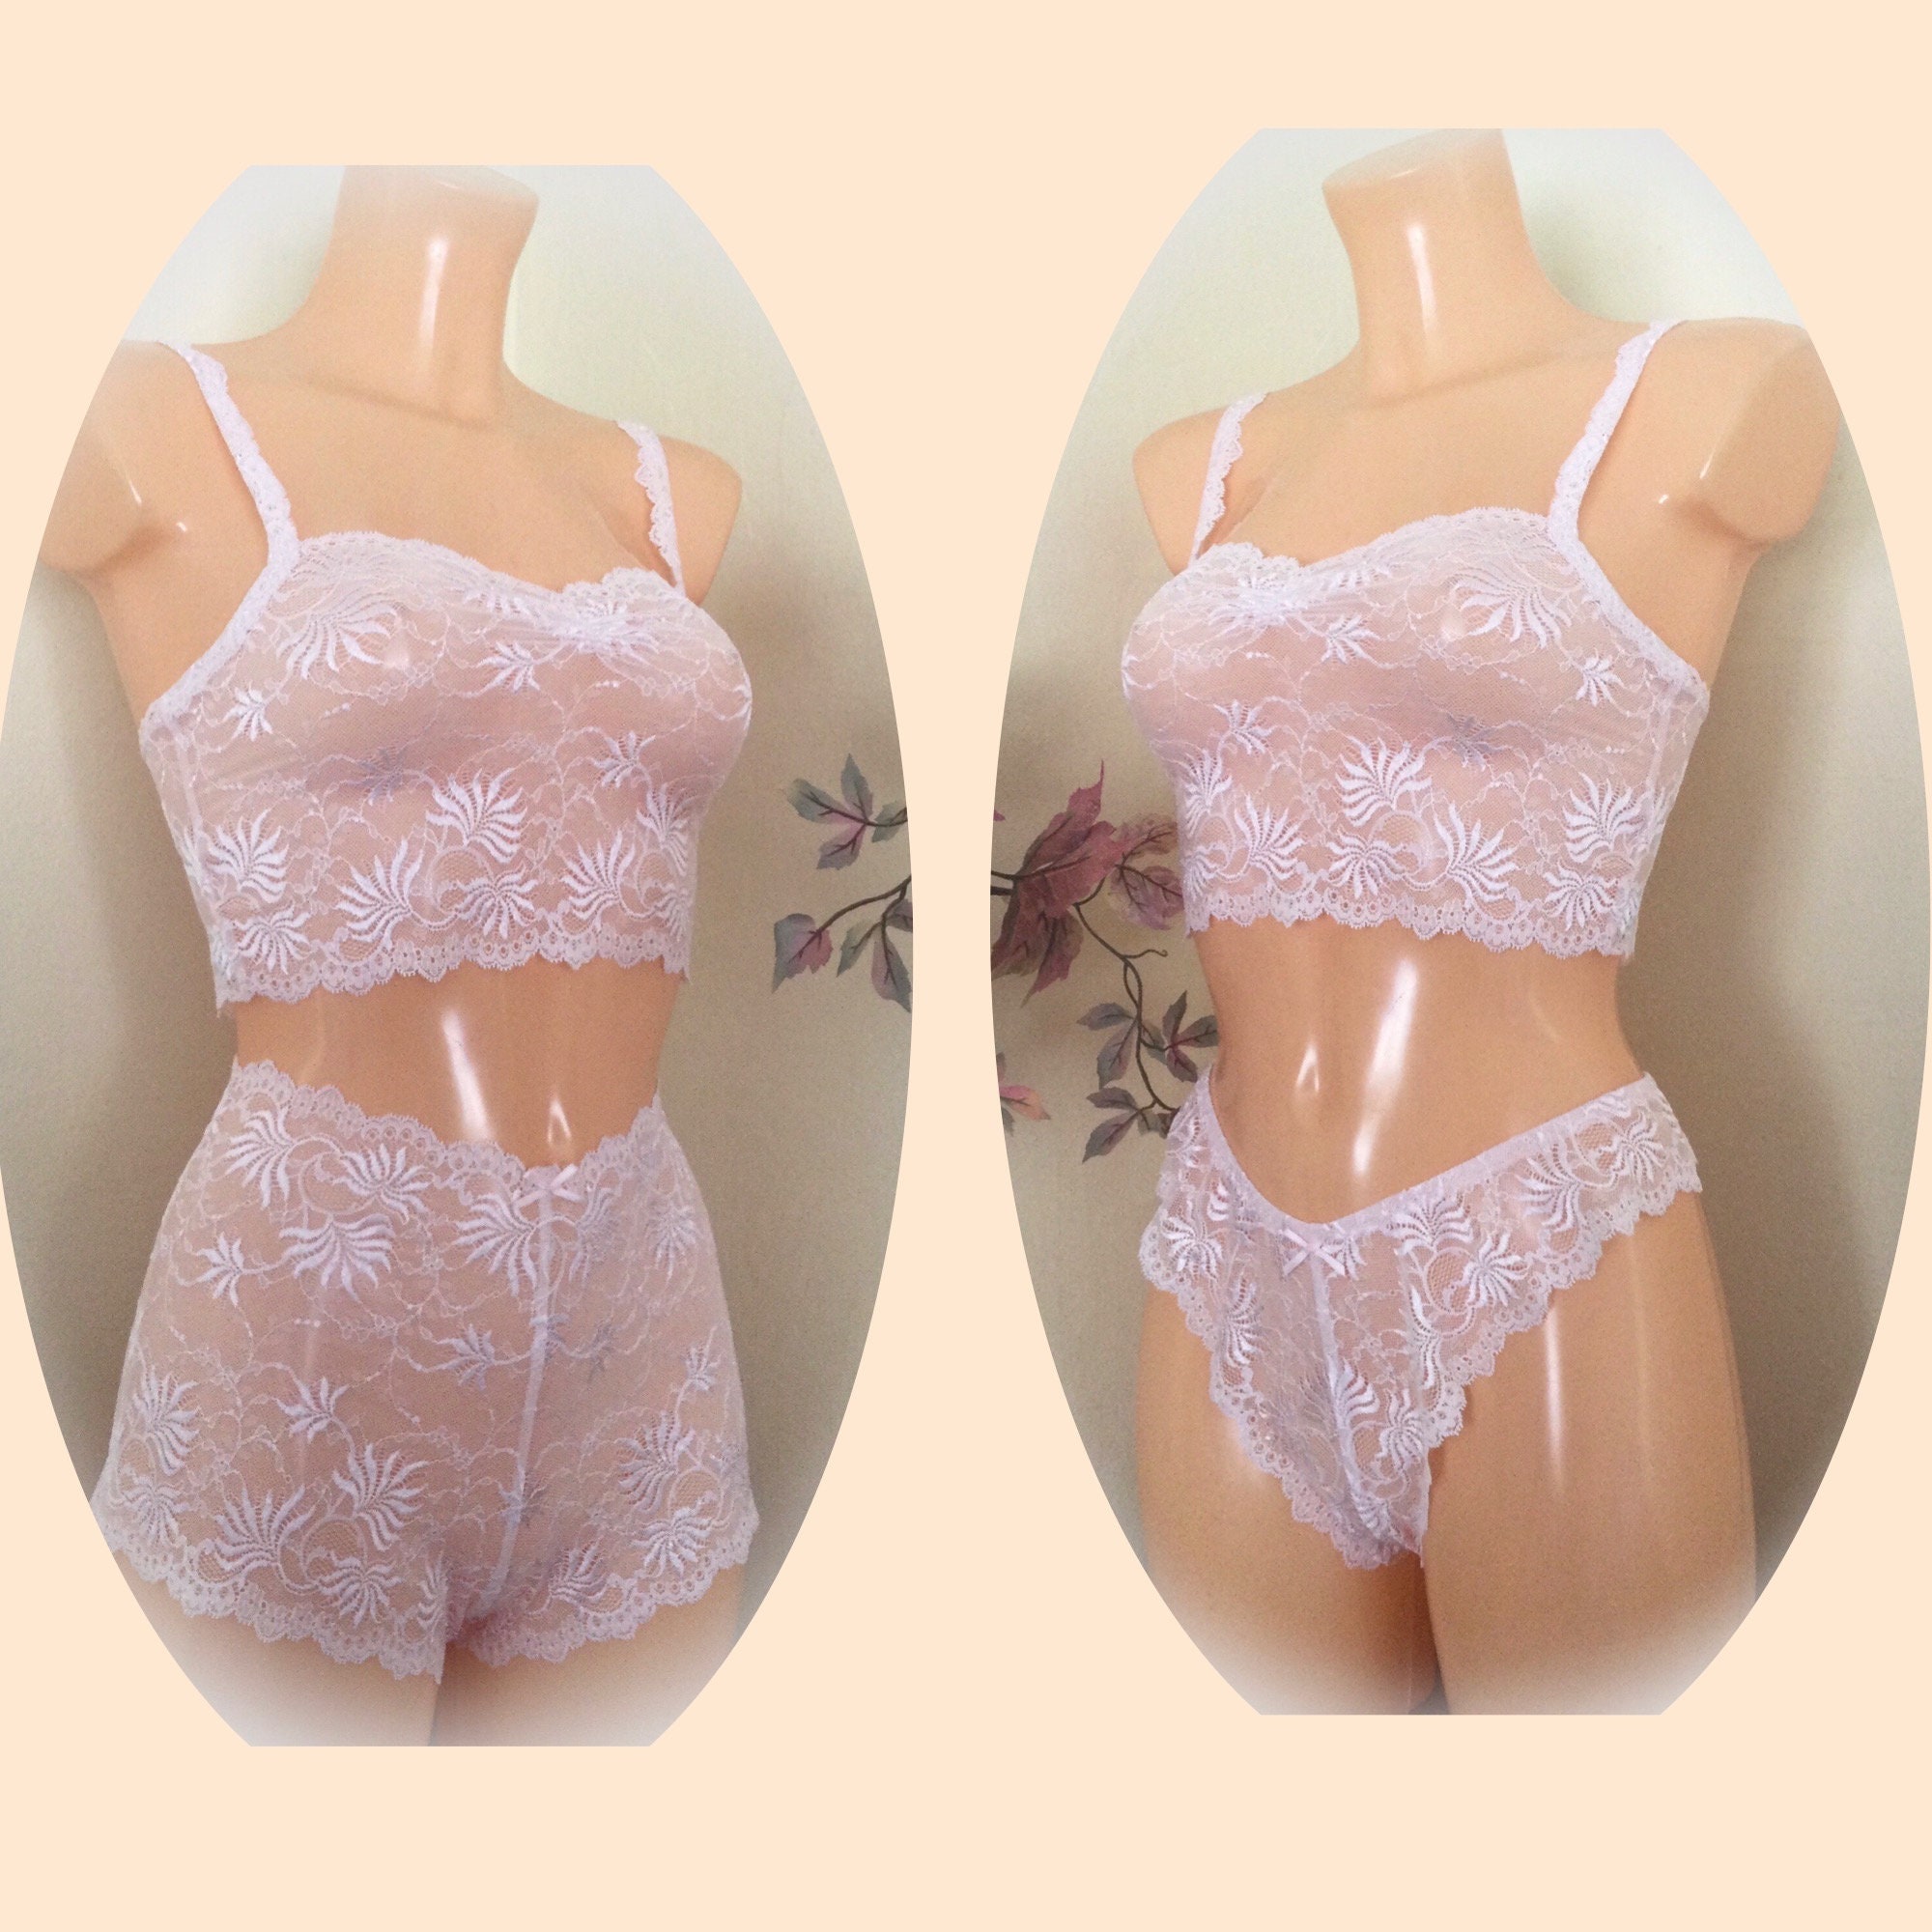 AA Cup Bralette Vest, No Cup Bra Set, Choice of Thong or Shortie